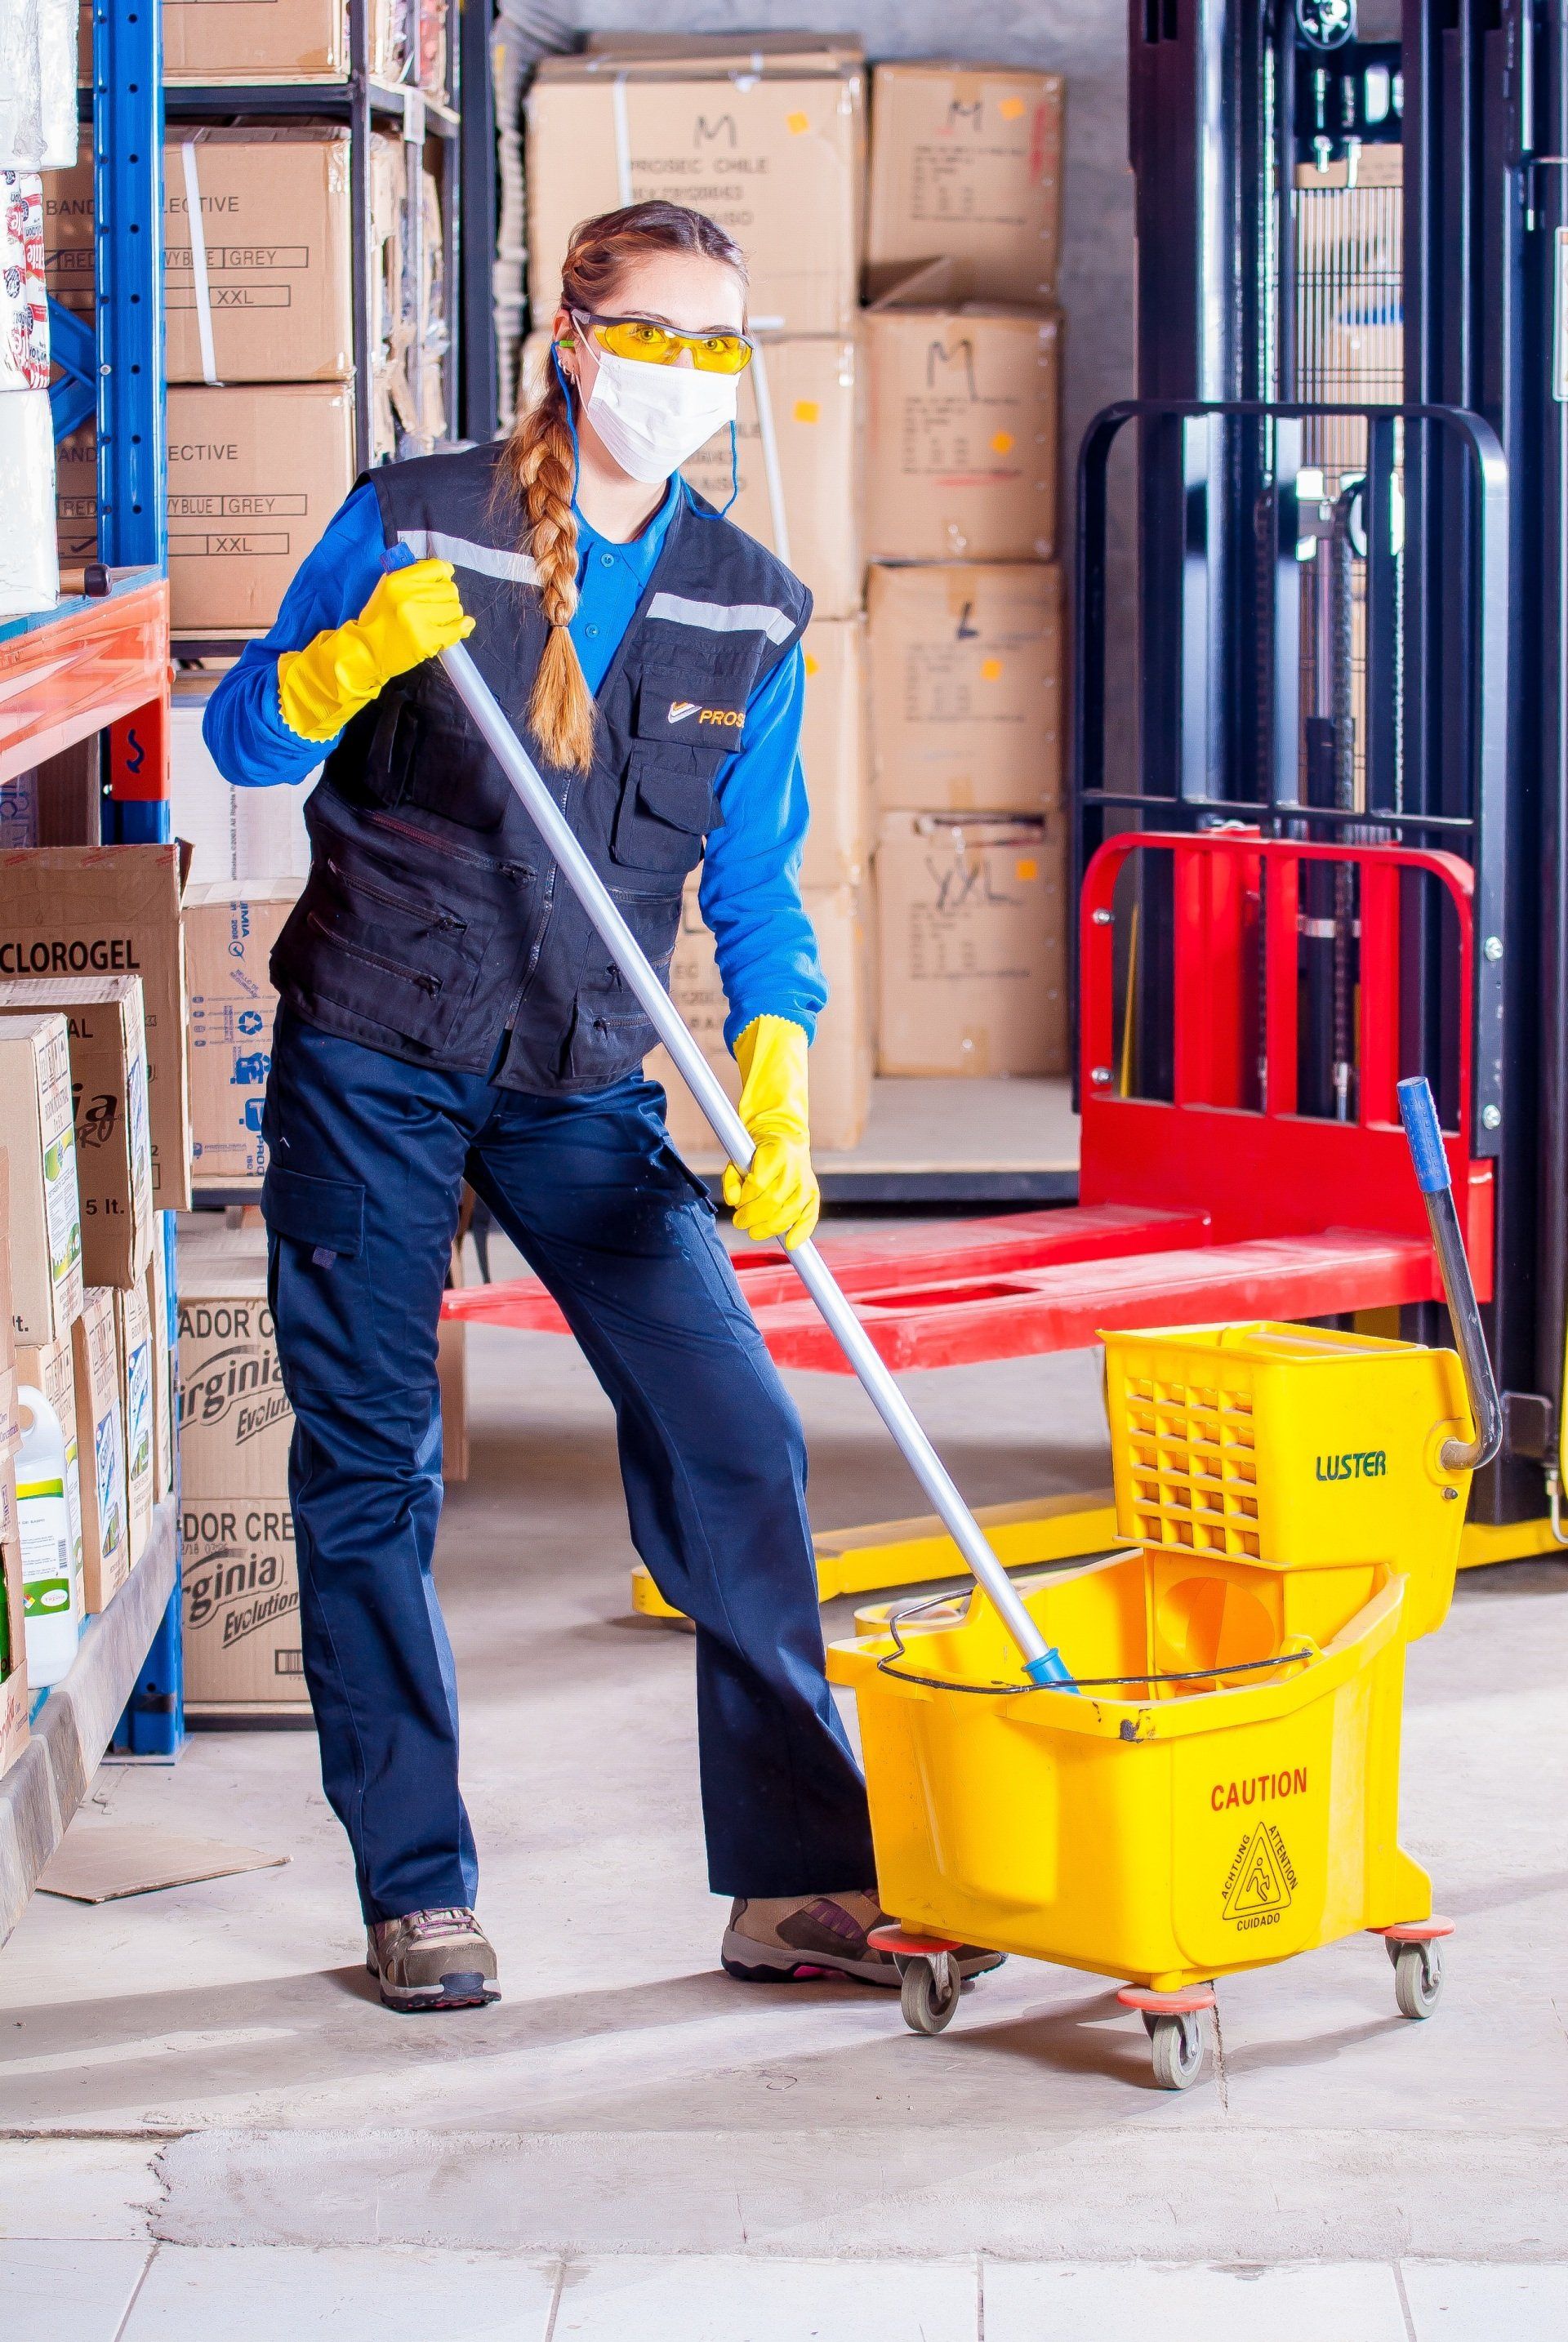 commercial cleaning services in Itasca, IL